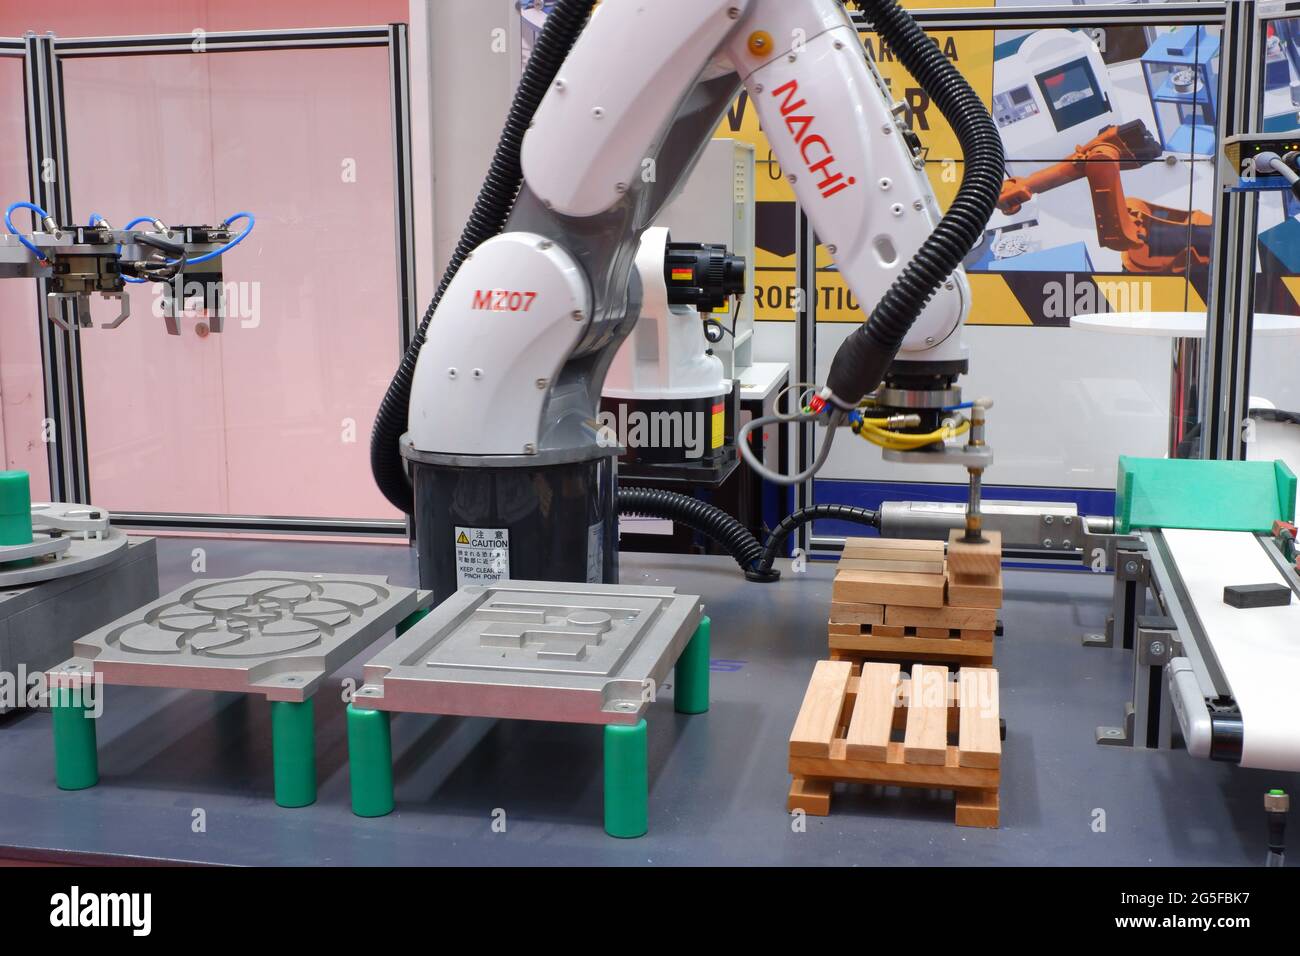 Multipurpose Robotic Hand on Exhibition at an Industrial Fair Stock Photo